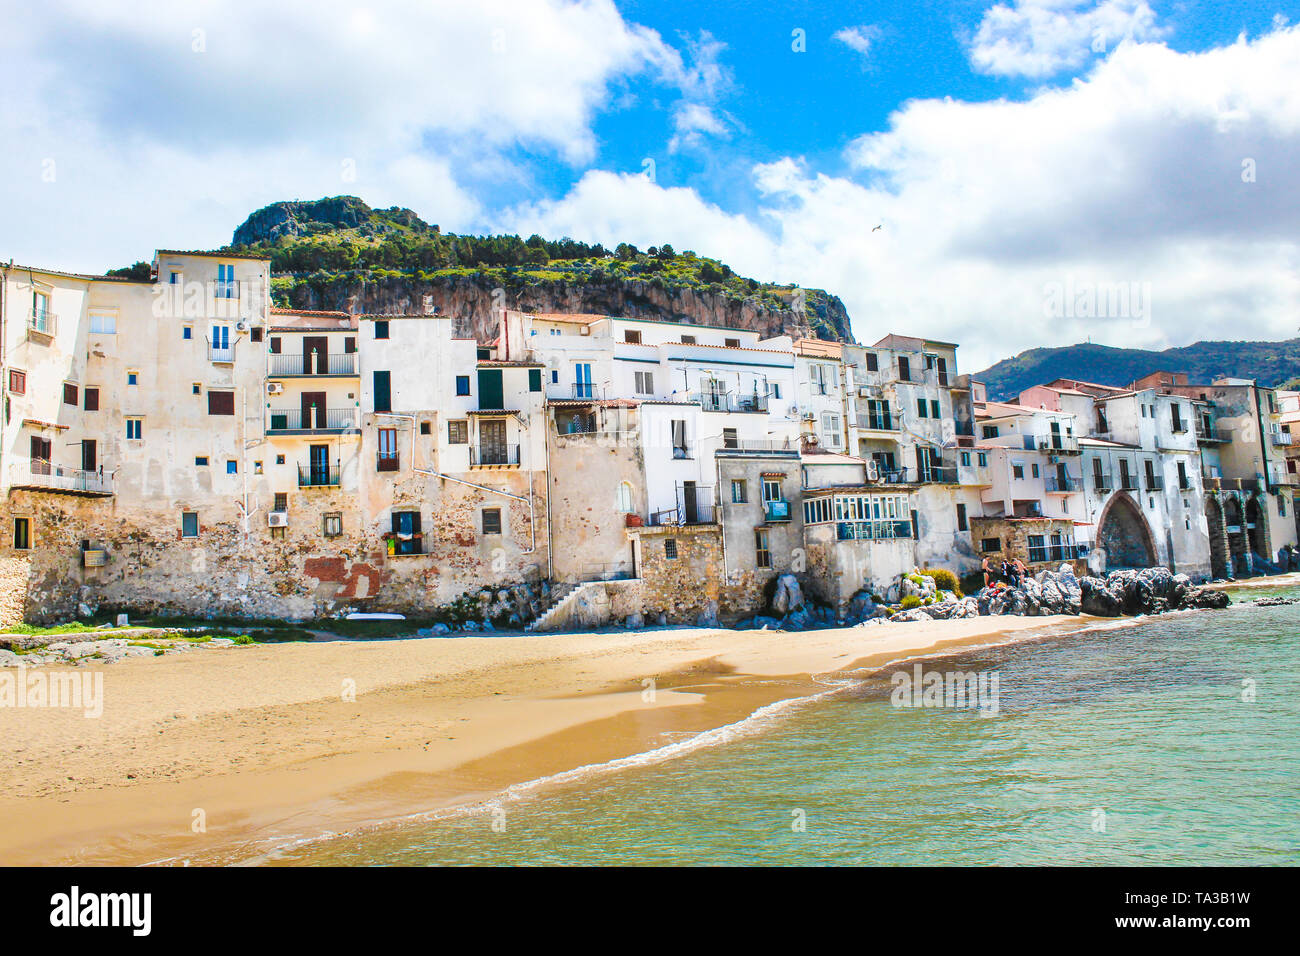 Traditional historical houses on the coast of Tyrrhenian sea in Sicilian Cefalu, Italy. Behind the houses there is rock overlooking the city. The beautiful Italian city is popular tourist attraction. Stock Photo